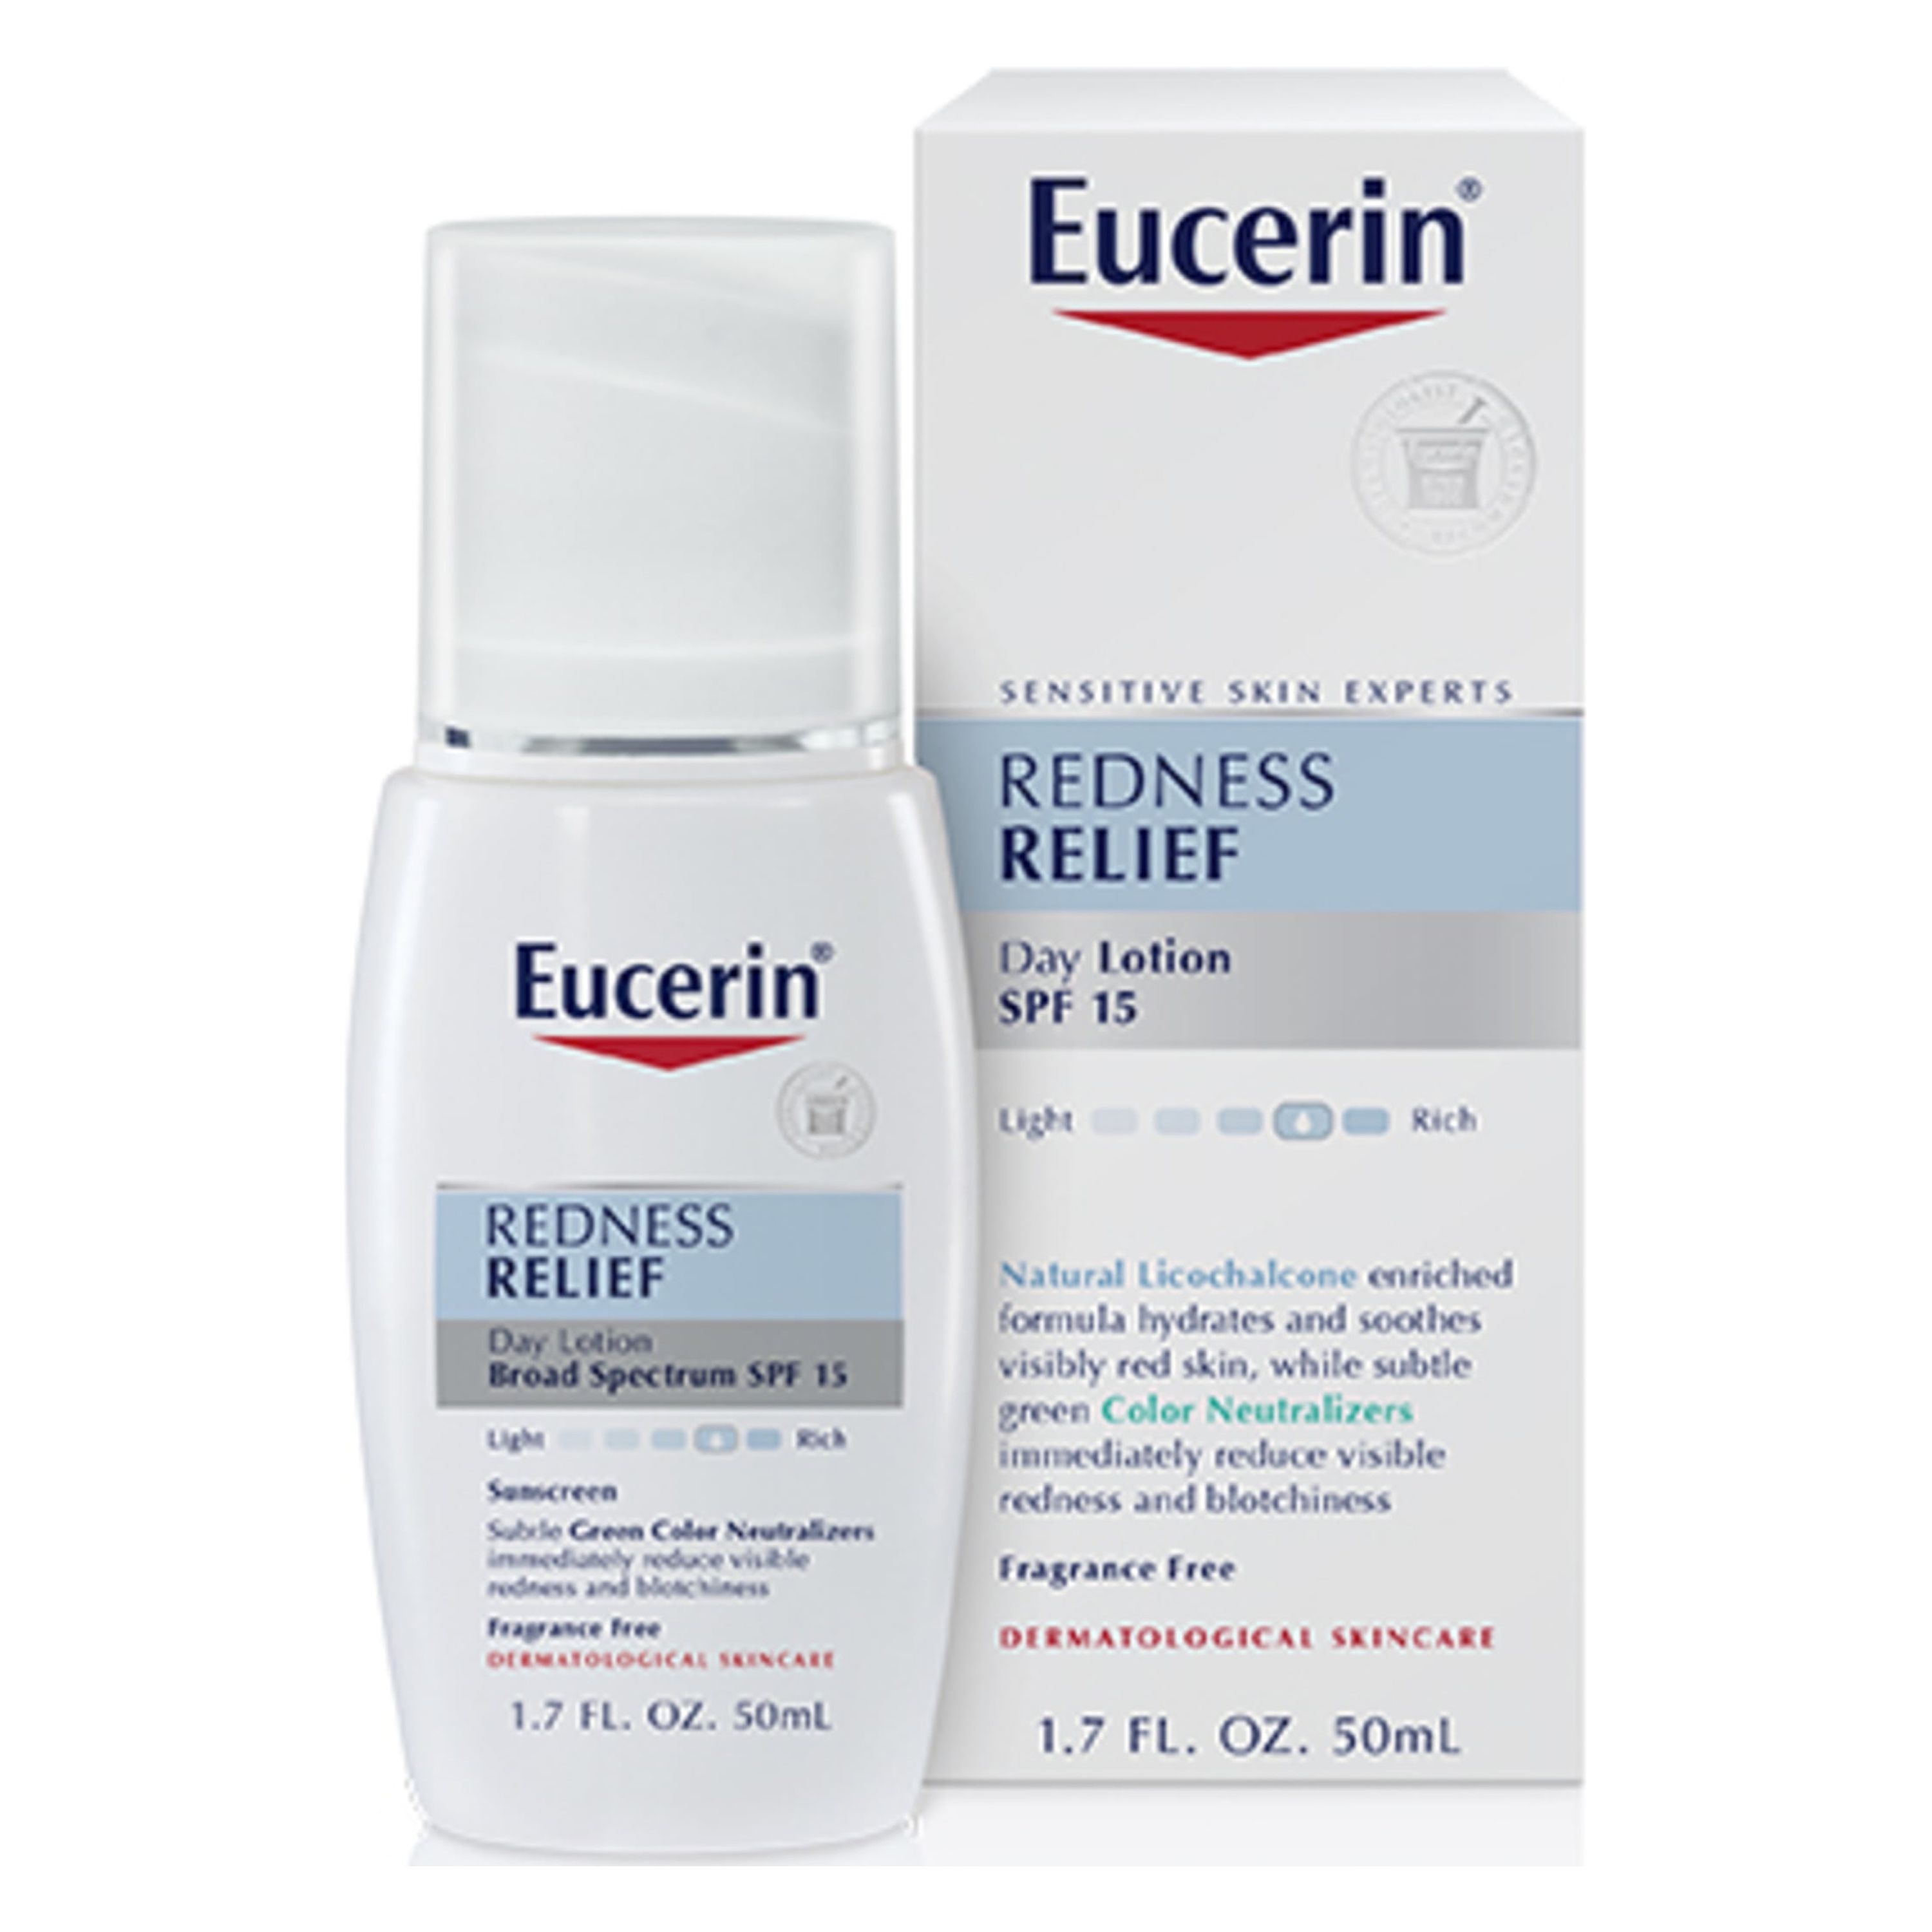 Eucerin  Redness Relief Day Lotion Broad Spectrum SPF 15, 1.7 Fl Oz - image 1 of 10